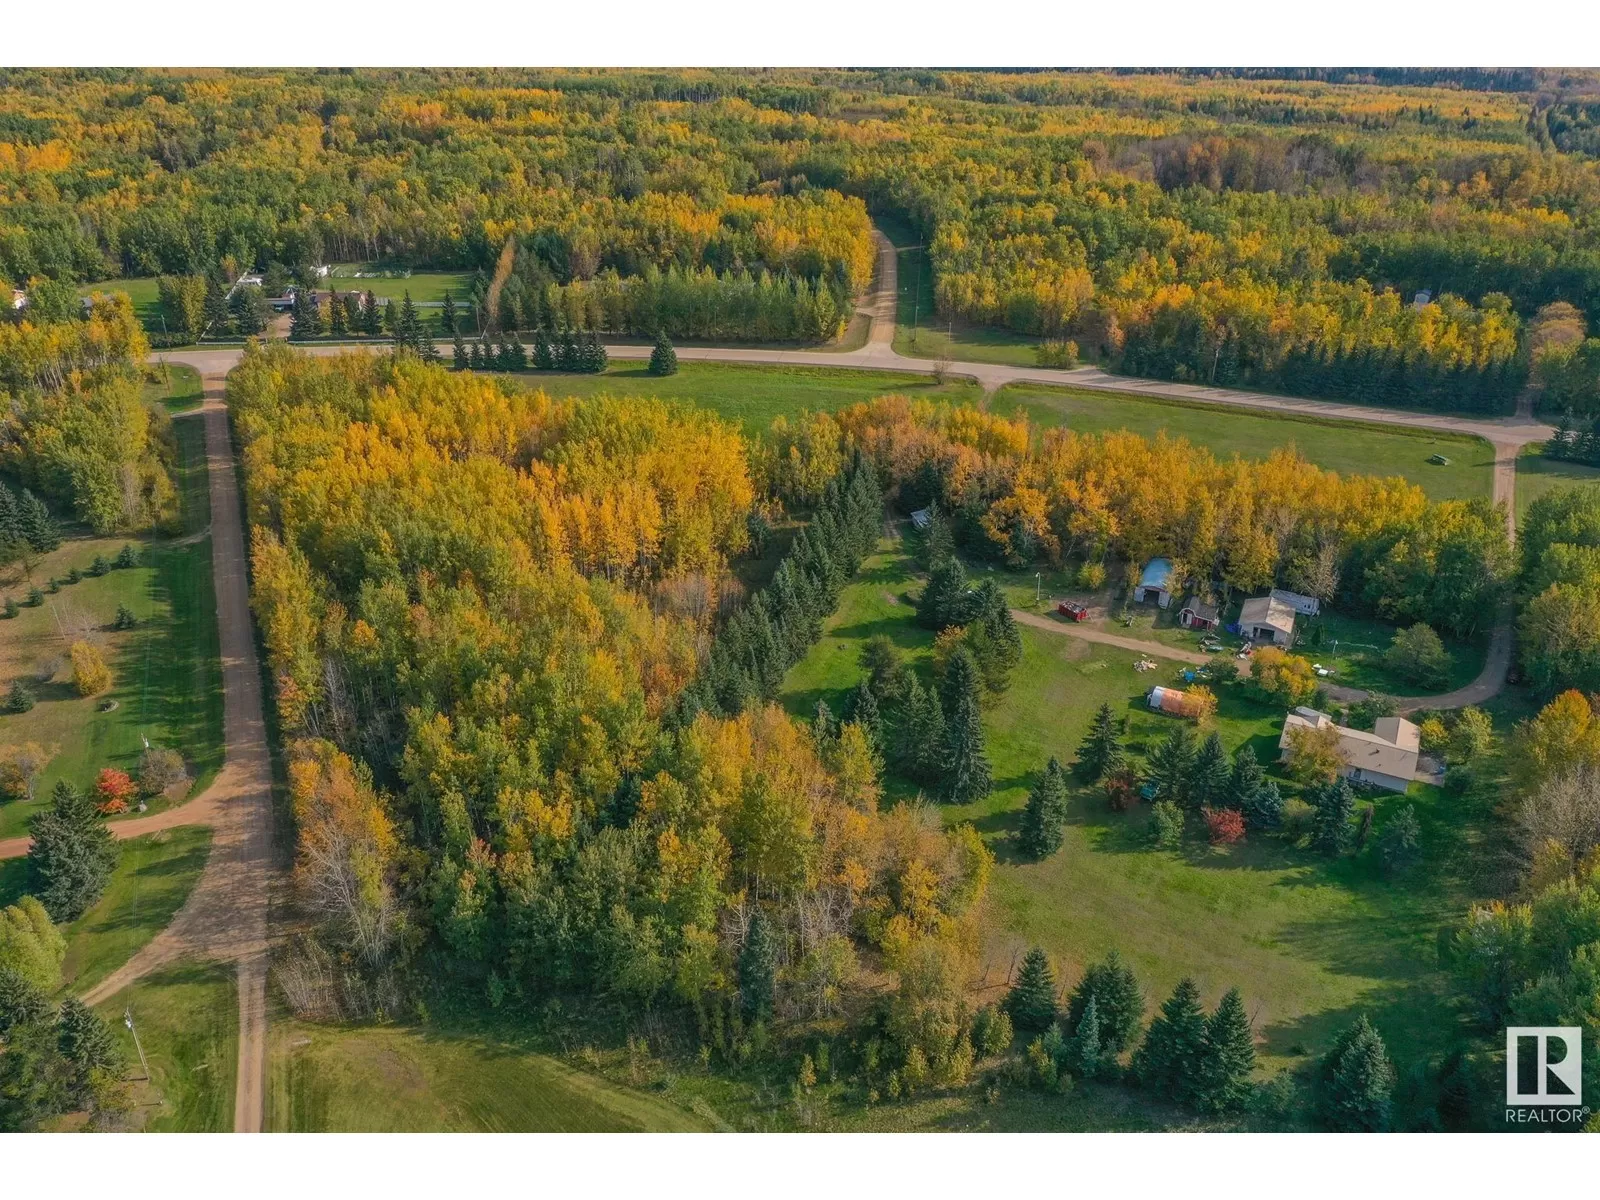 No Building for rent: Pt Nw -21-65-22-w4, Rural Athabasca County, Alberta T0G 0R0